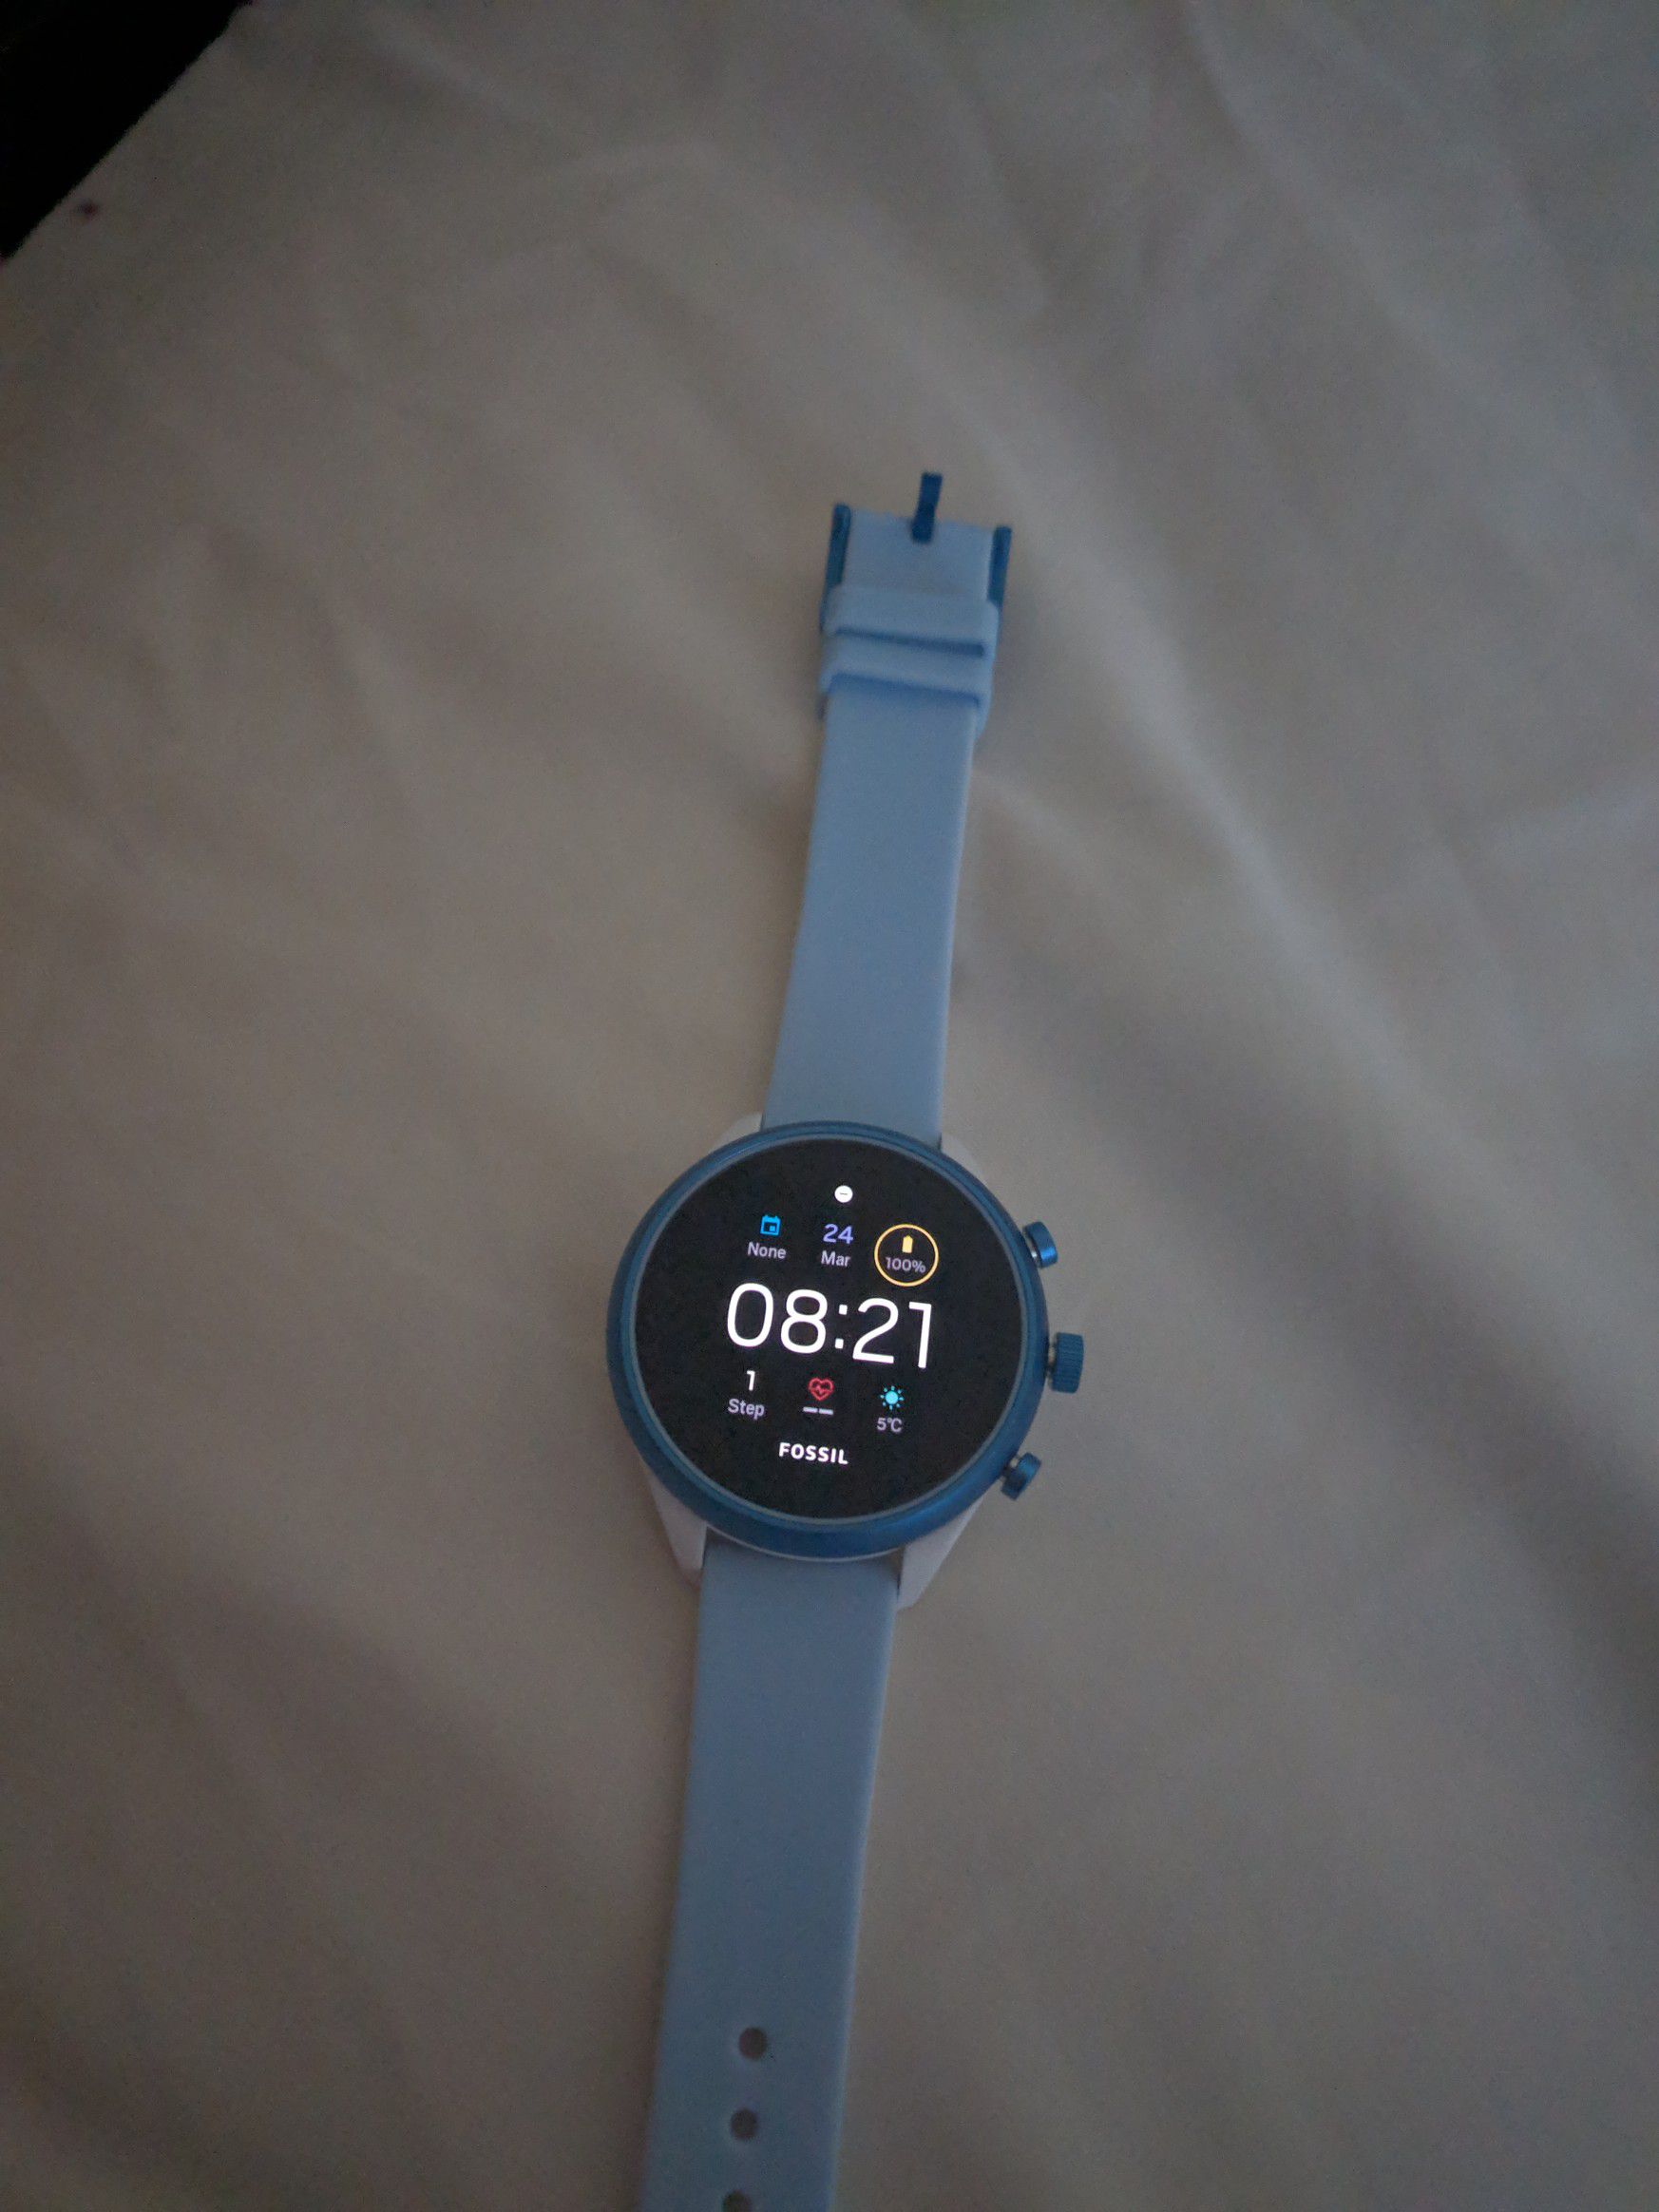 Fossil sport Android wear smartwarch 41mm